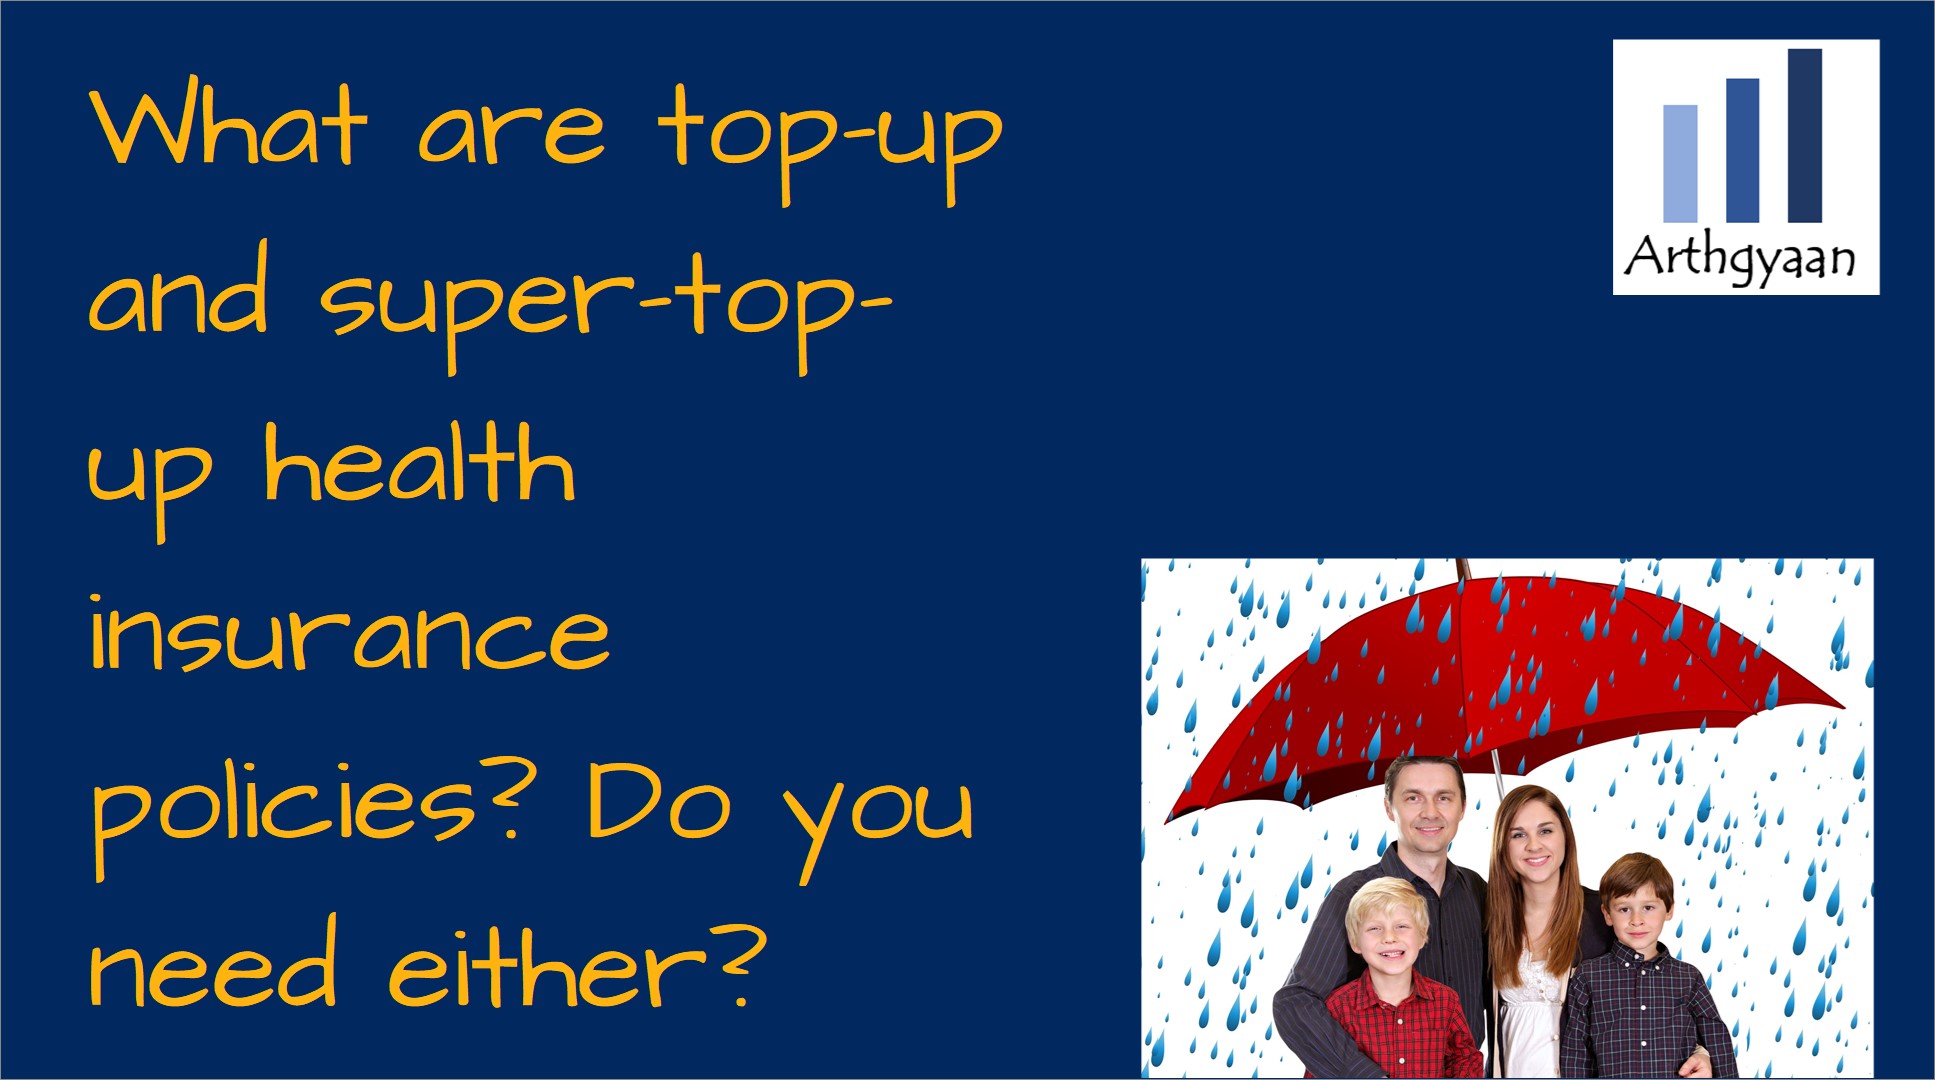 What are top-up and super-top-up health insurance policies? Do you need either?